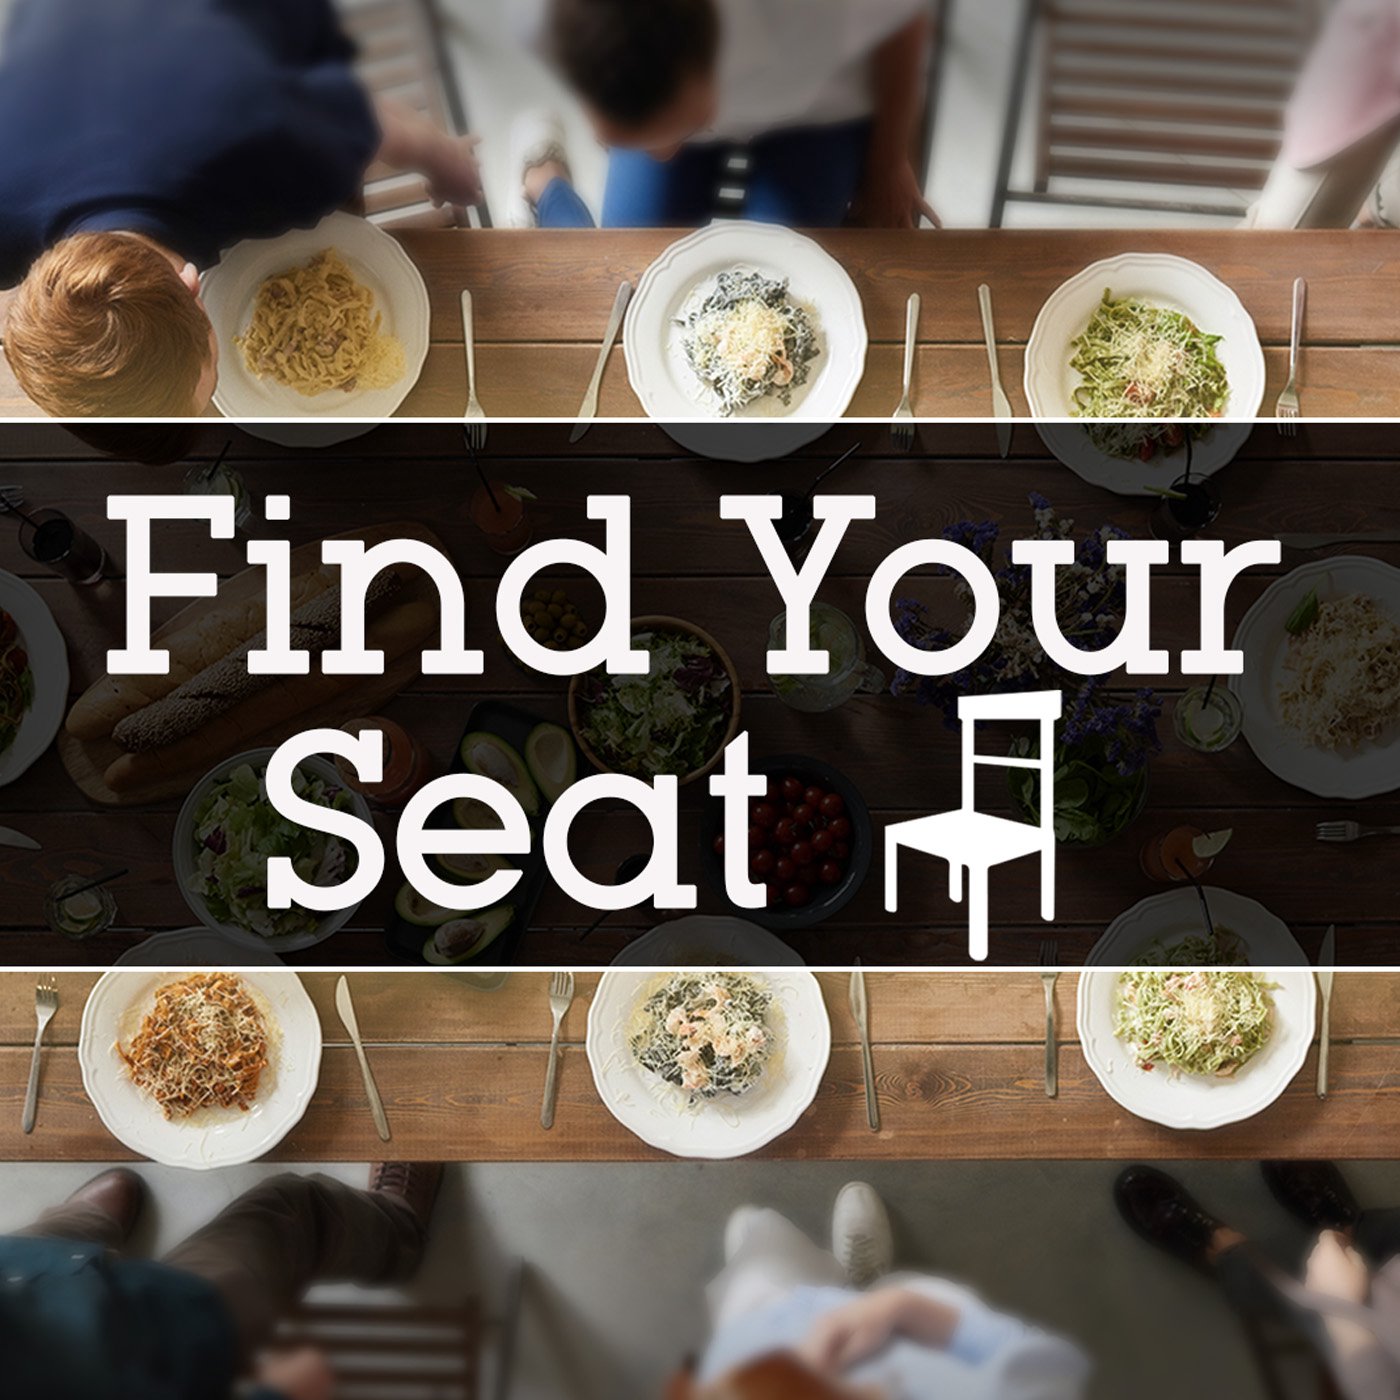 Find Your Seat: Find a Seat at the Table